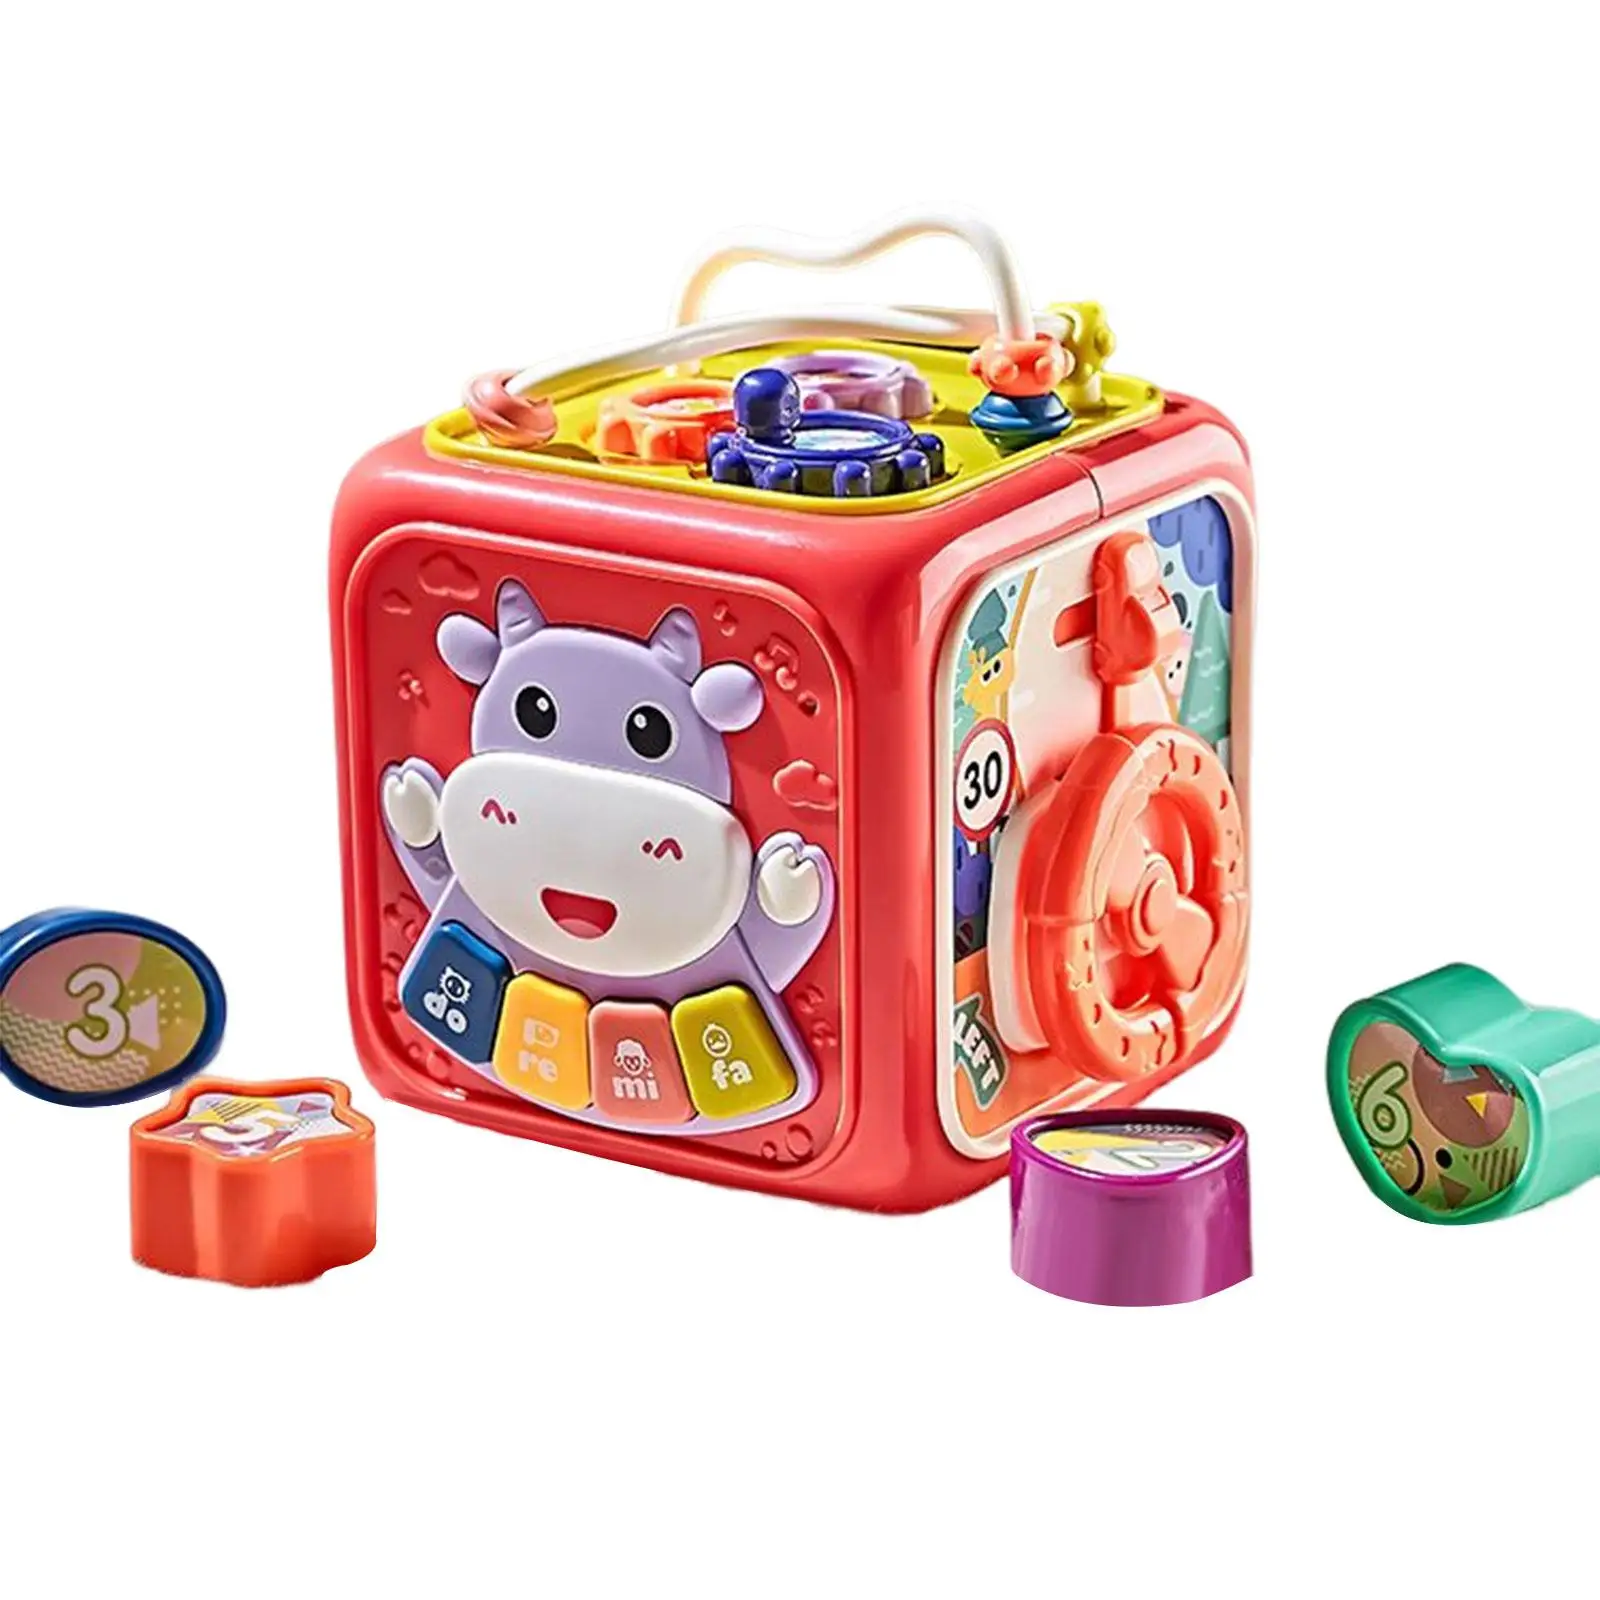 Baby Toy 6 in 1 Learning Puzzle Toy Activity Cube Toy for Birthday Gift Boys Girls 6 Month Old Baby Toys 12-18 Months